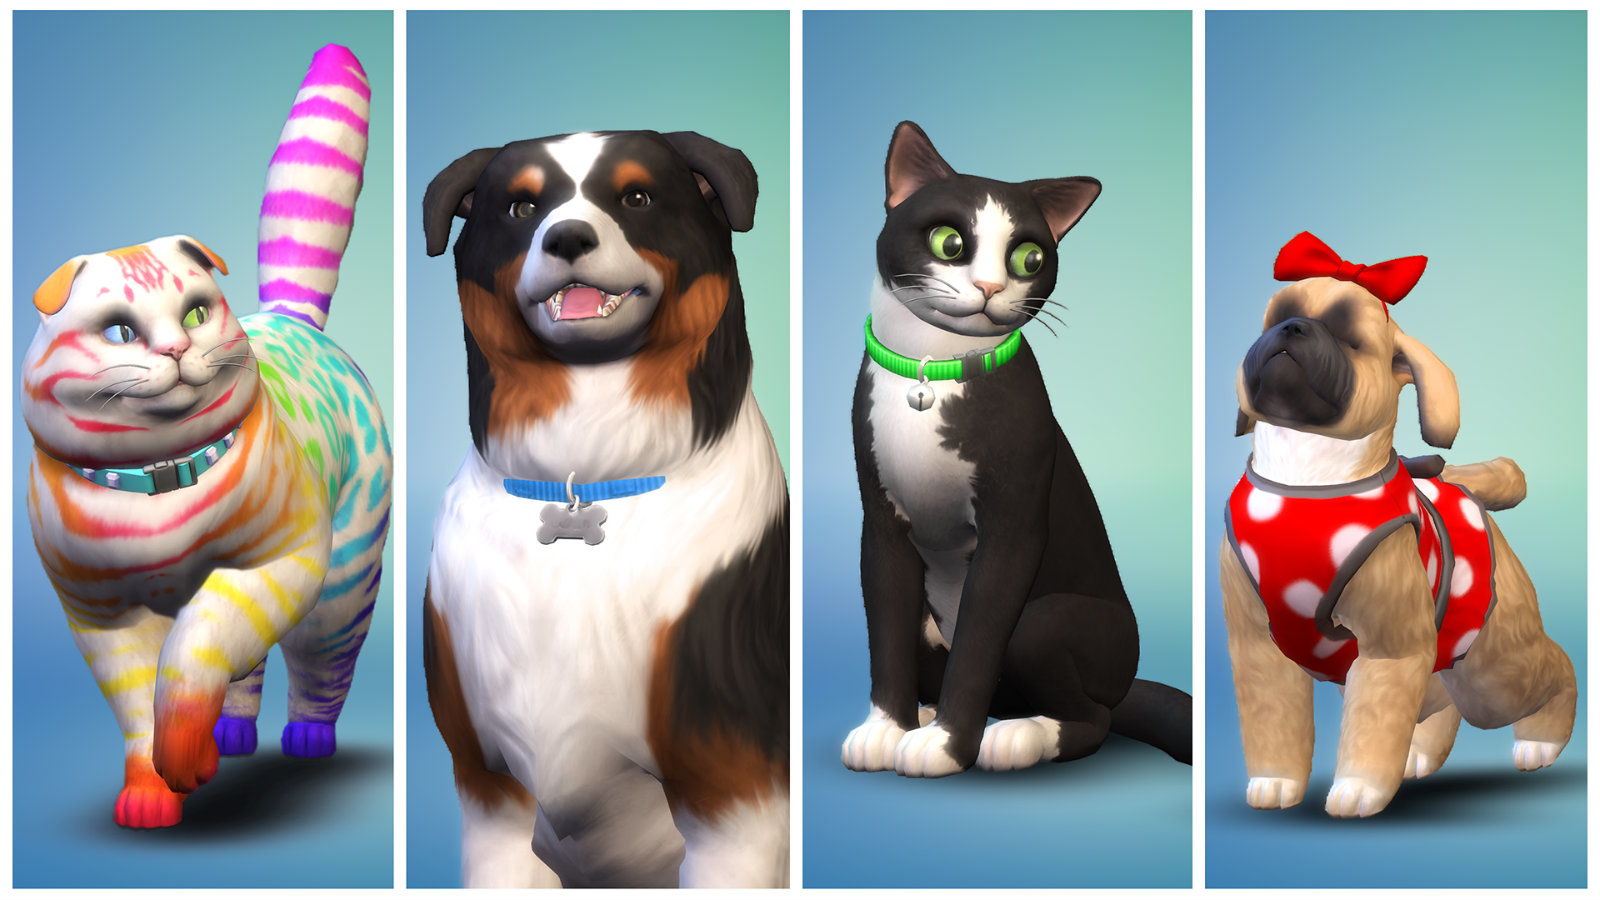 EA Announces ‘The Sims 4 Cats and Dogs’